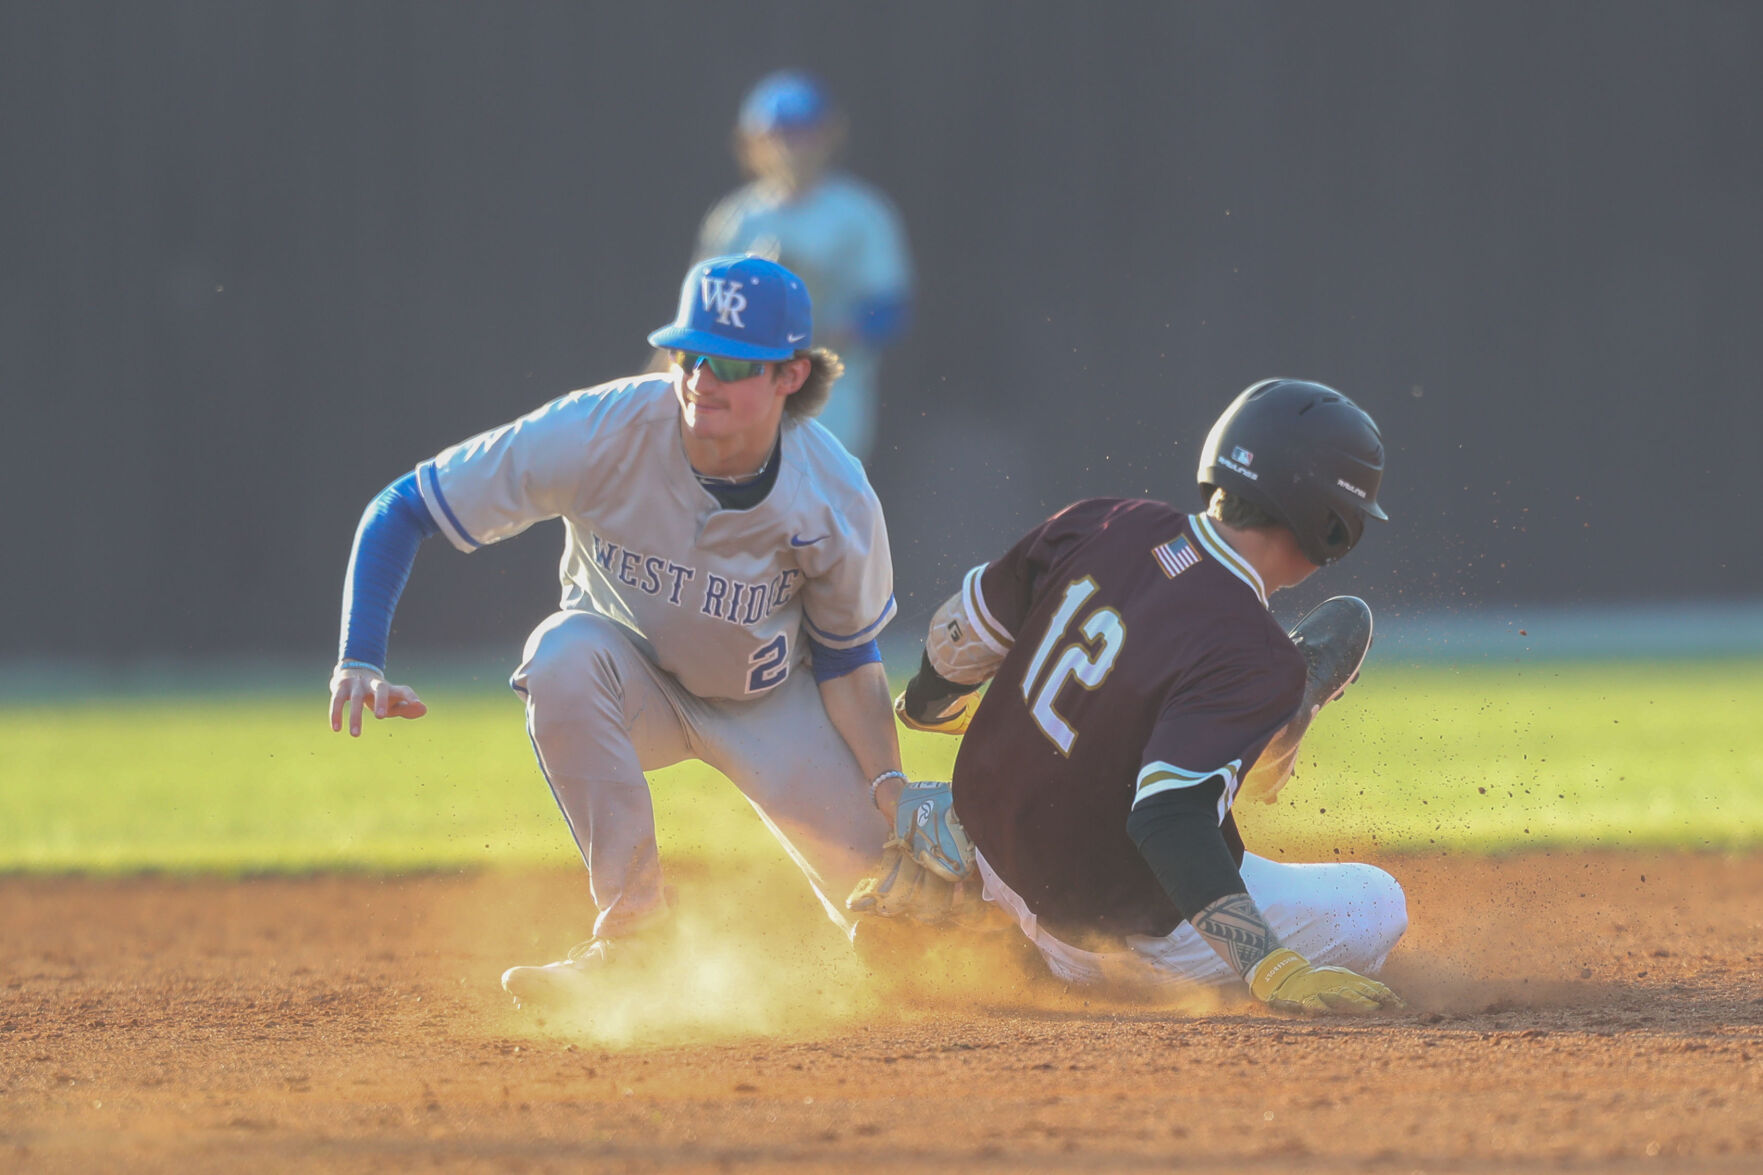 Tennessee High Dominates in 11-3 Victory Over Gate City Behind Hutton’s Return to Baseball